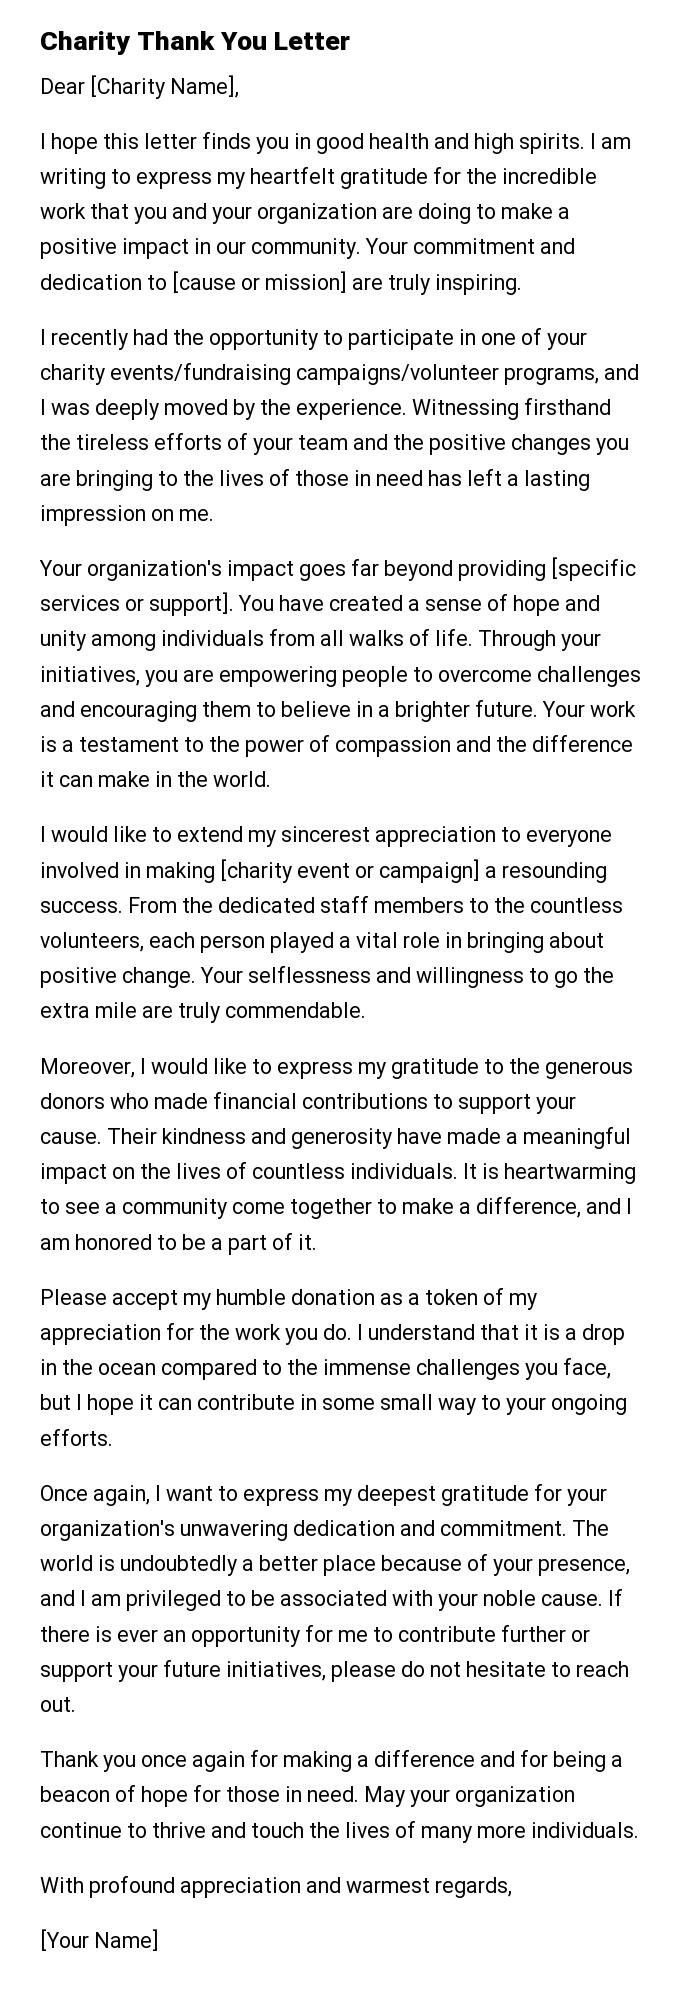 Charity Thank You Letter